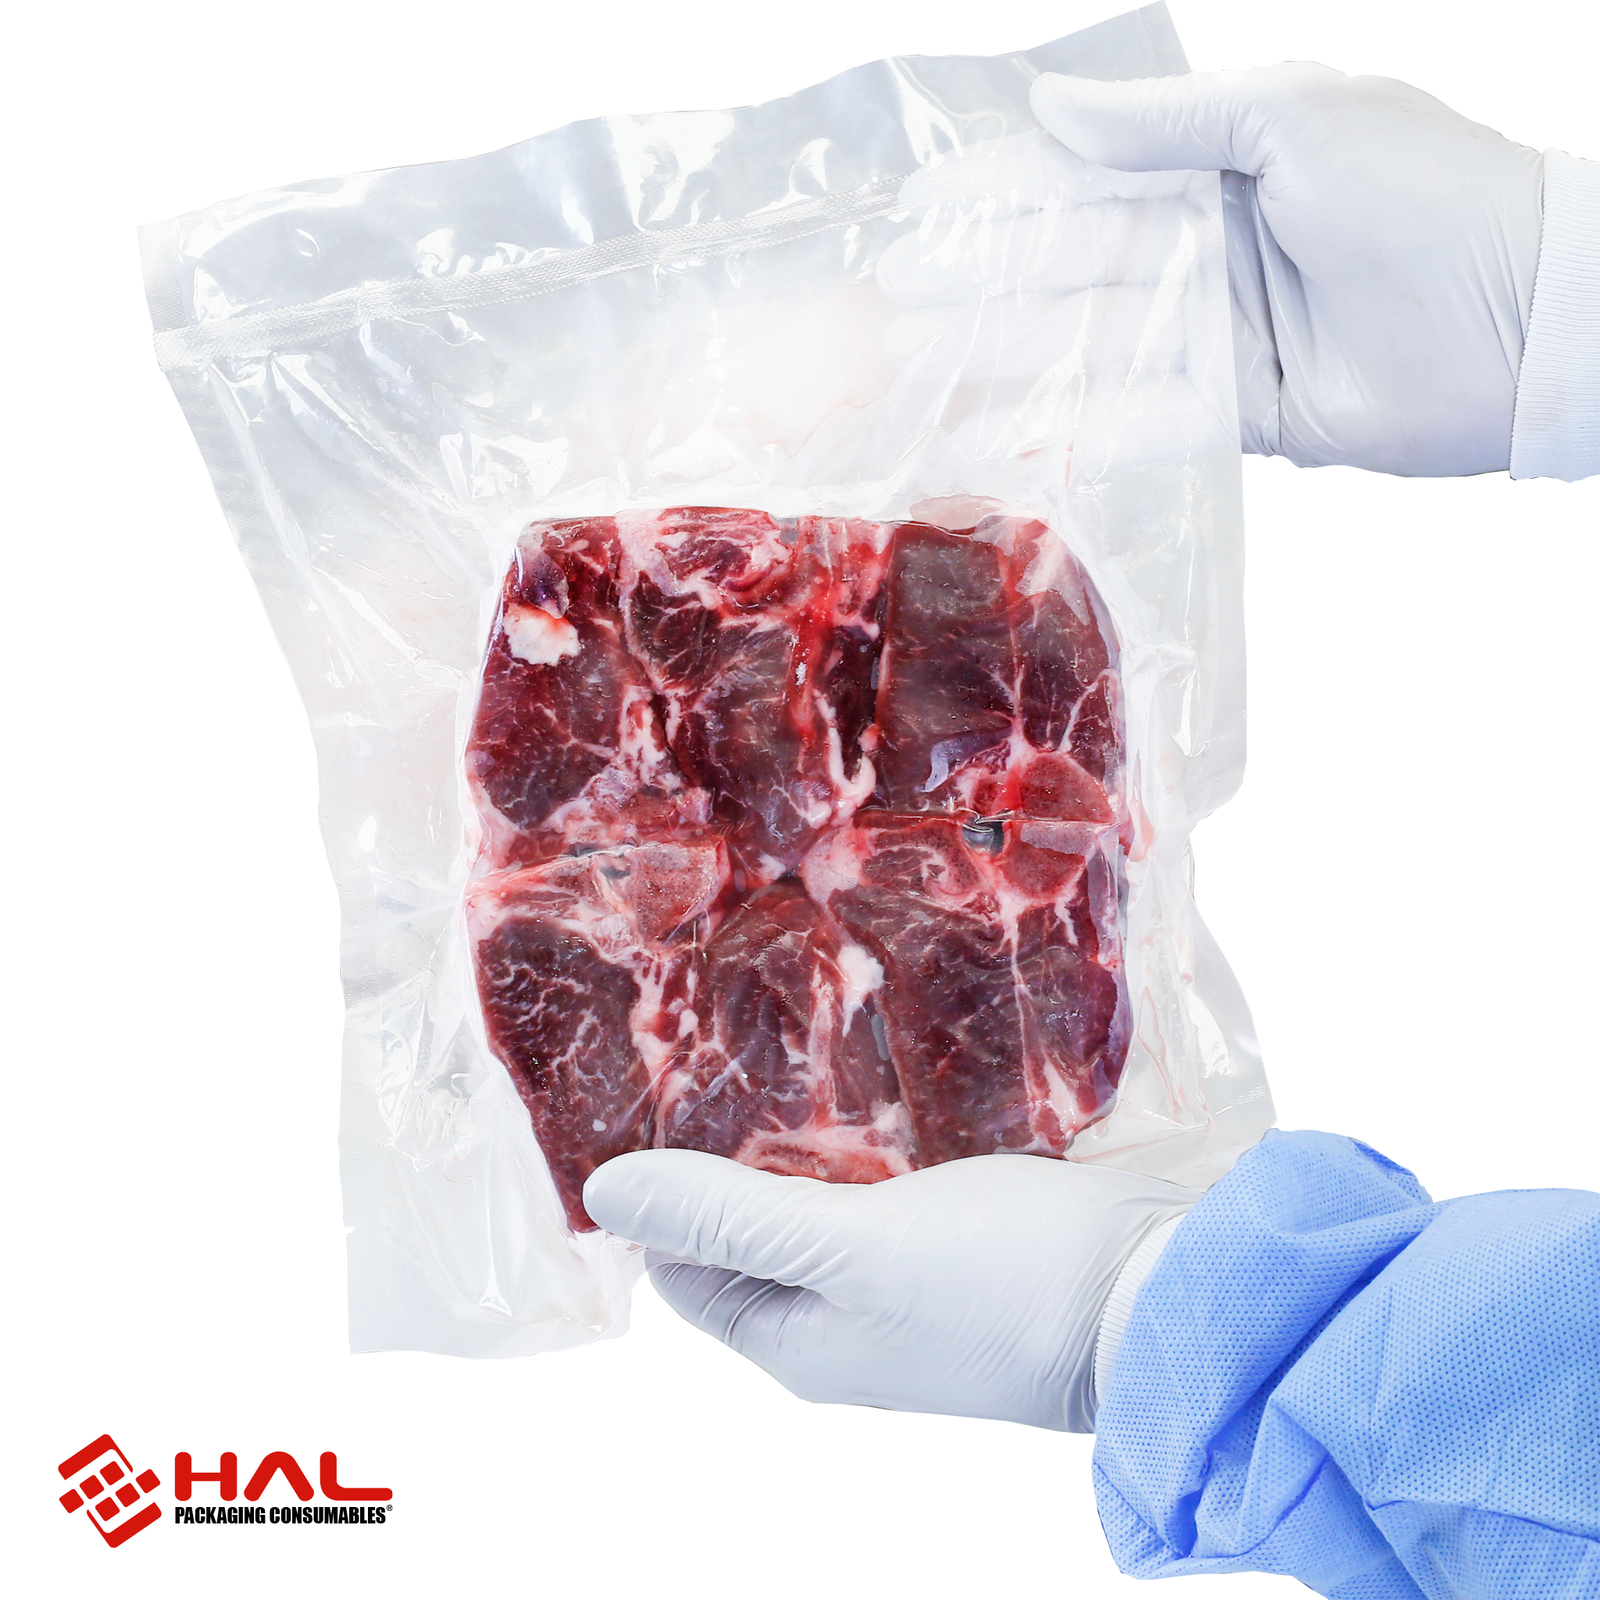 Hands of a person holding a vacuumed sealed bag with a large piece of raw meet inside. Vacuum pouch was sealed and vacuumed with the JORES TECHNOLOGIES® commercial dual seal vacuum sealer